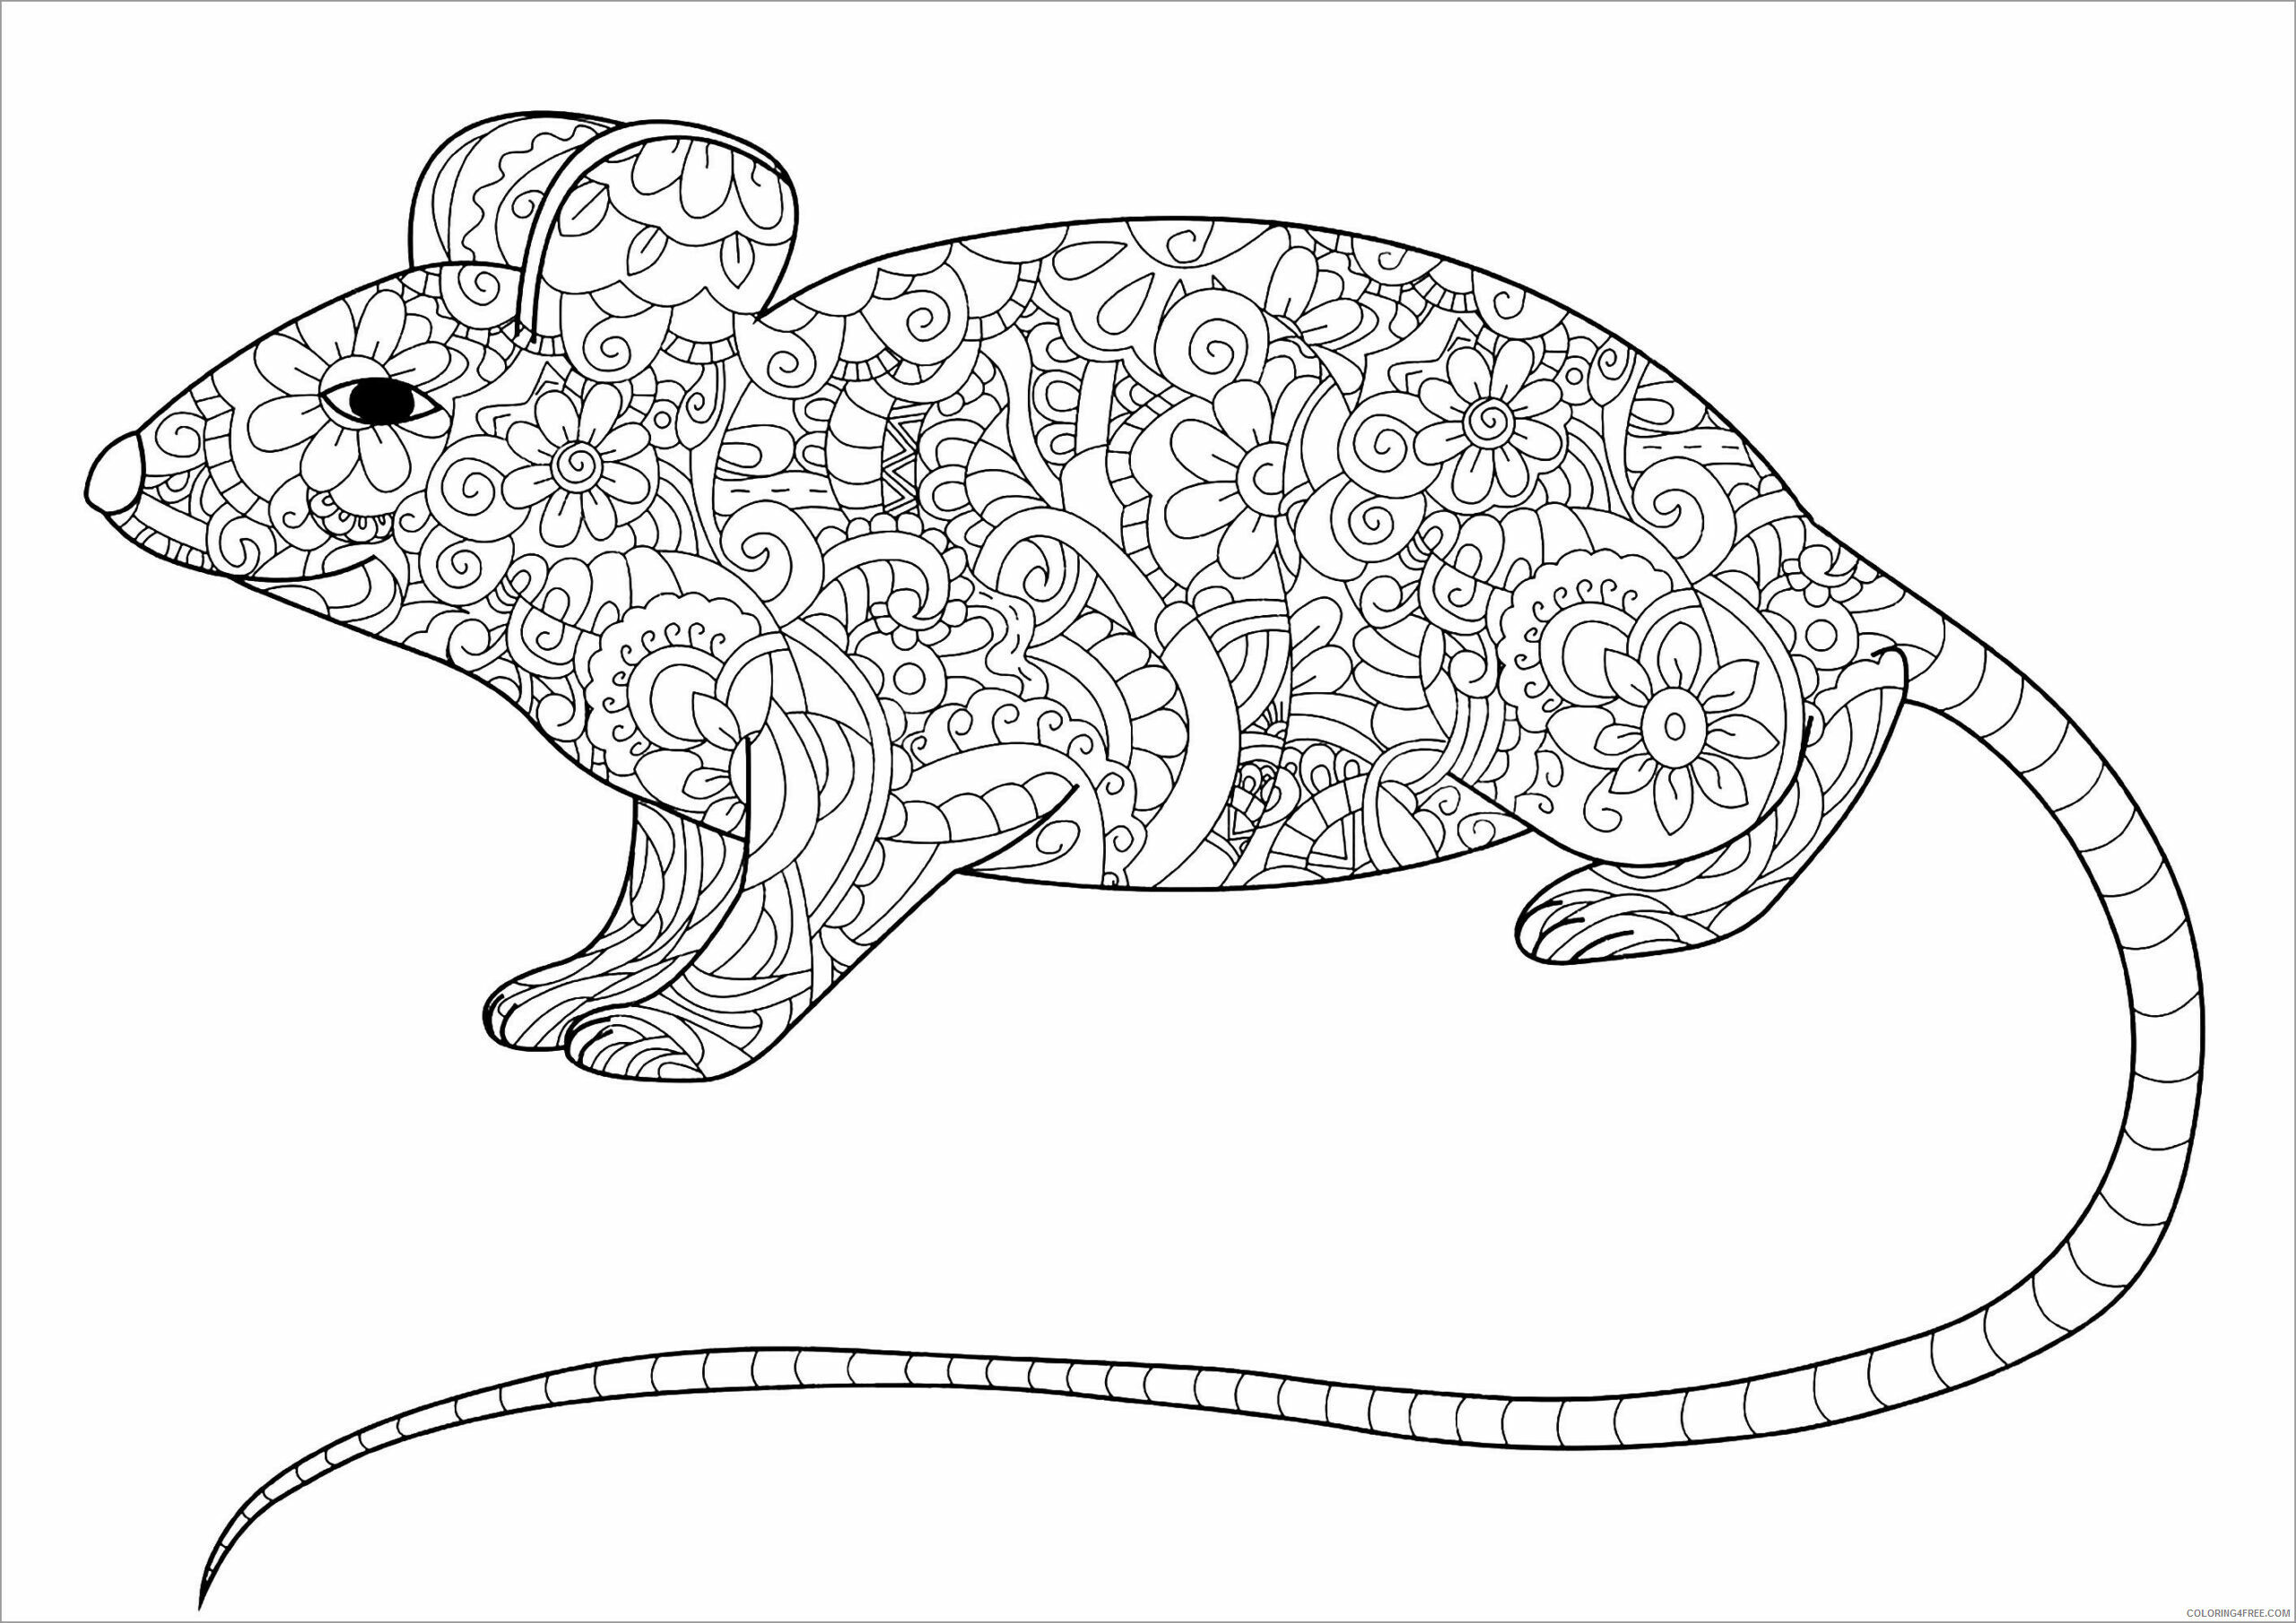 Animal Zentangle Coloring Pages mandala zentangle rat for adult unsmushed Printable 2020 170 Coloring4free